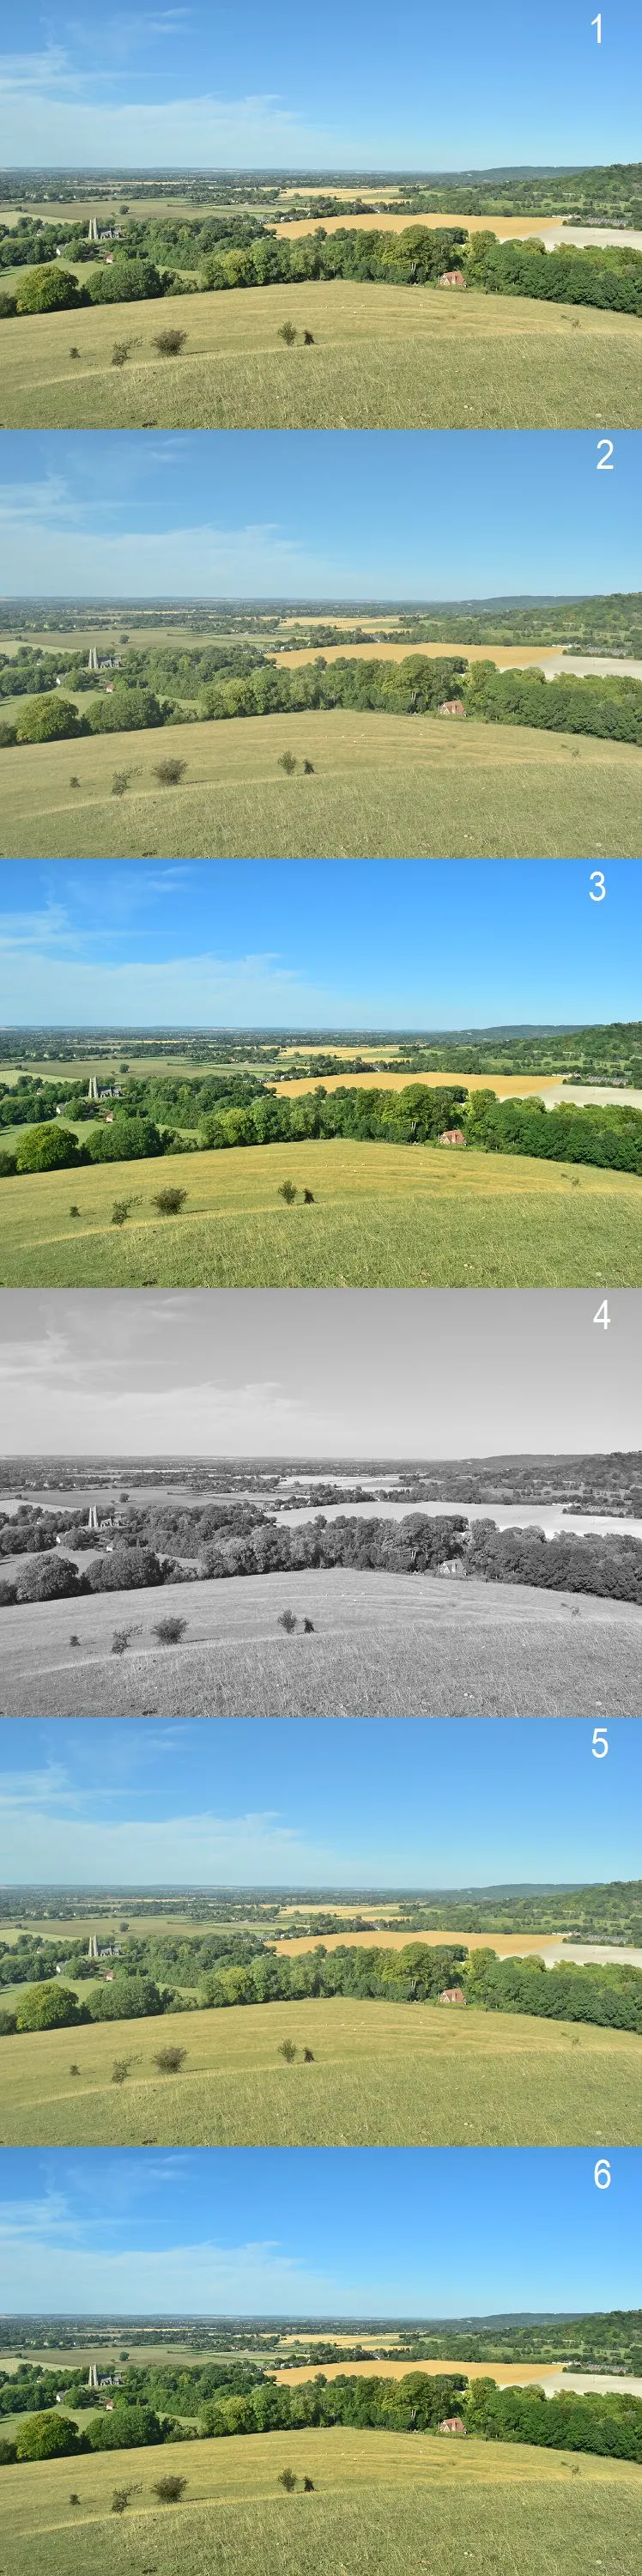 Nikon D5300 picture control photo example, Chiltern Hill in UK